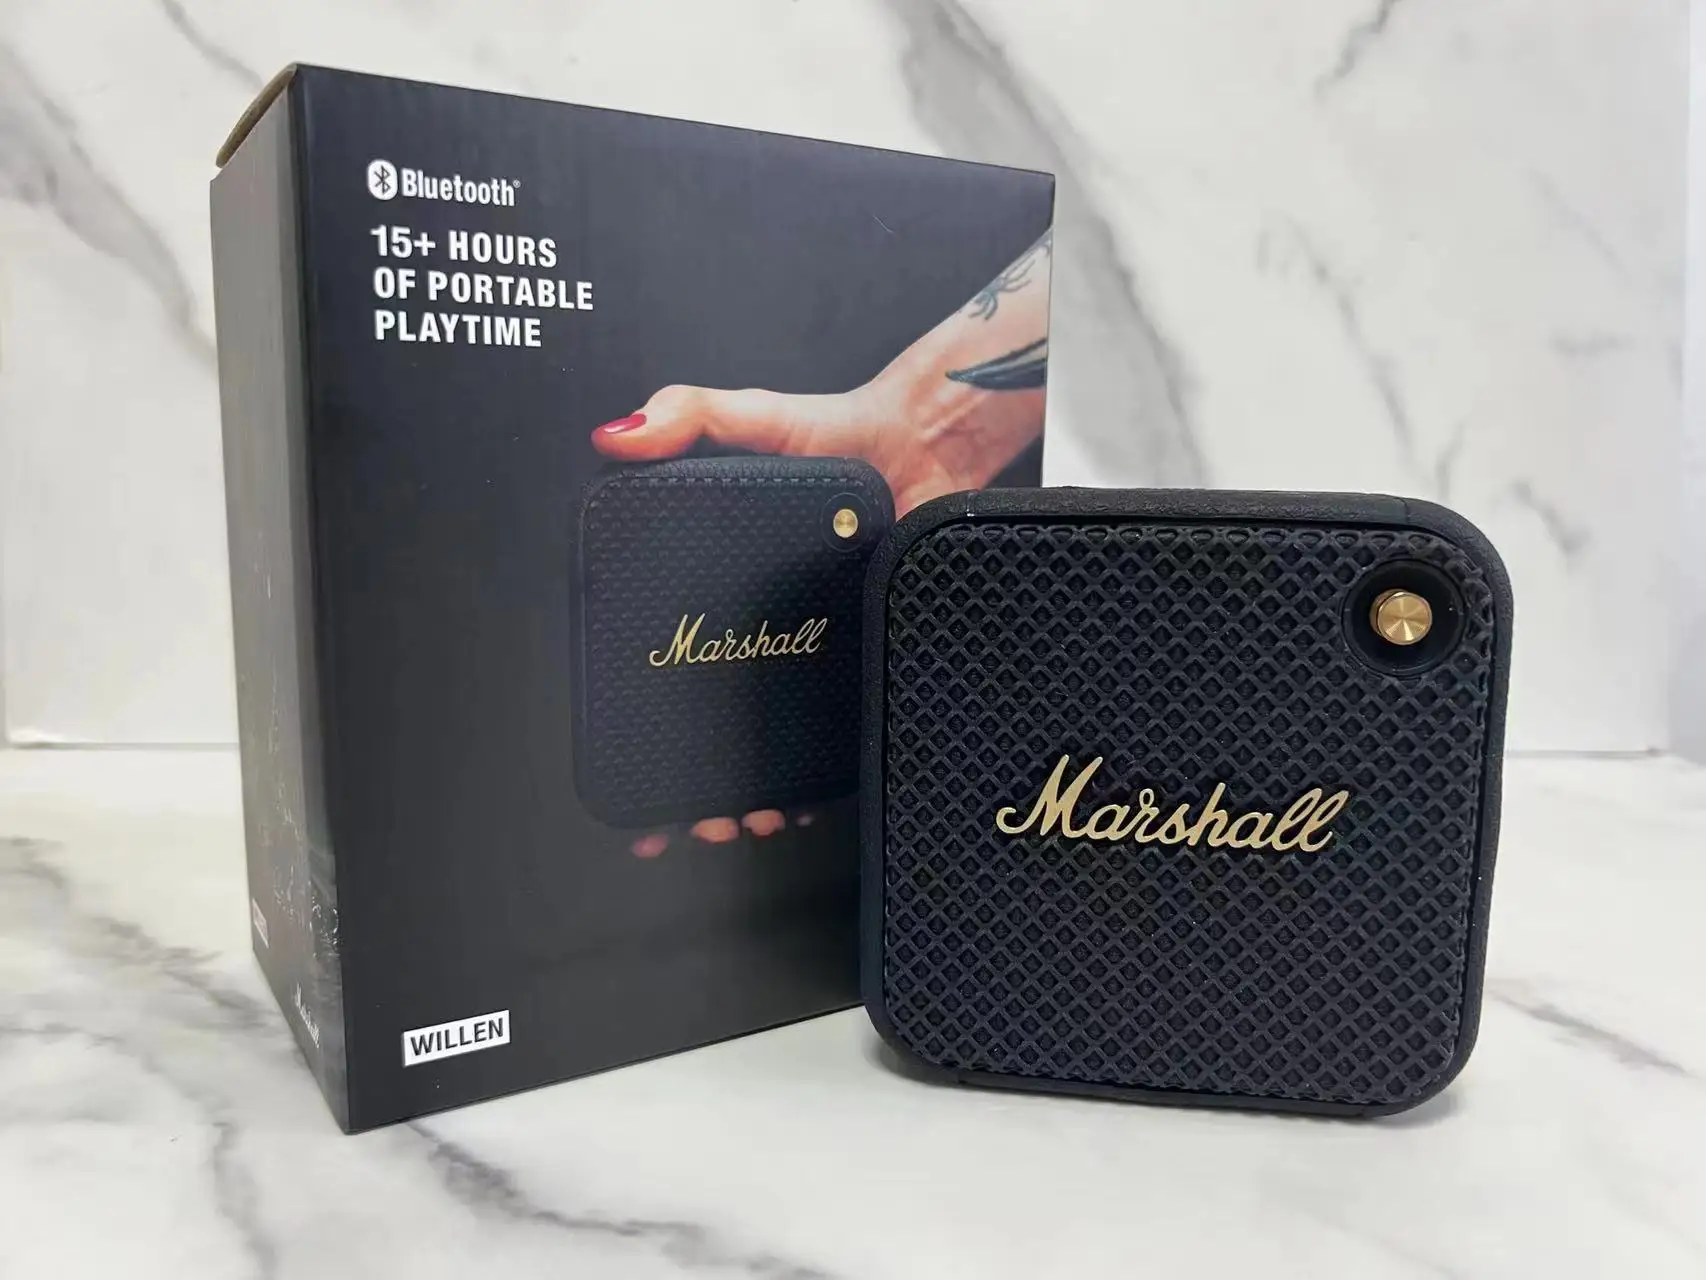 Original Marshall Willen Portale Wireless Bluetooth Speaker Entertainment Computer Stereo Go Out Party - Speakers - AliExpress